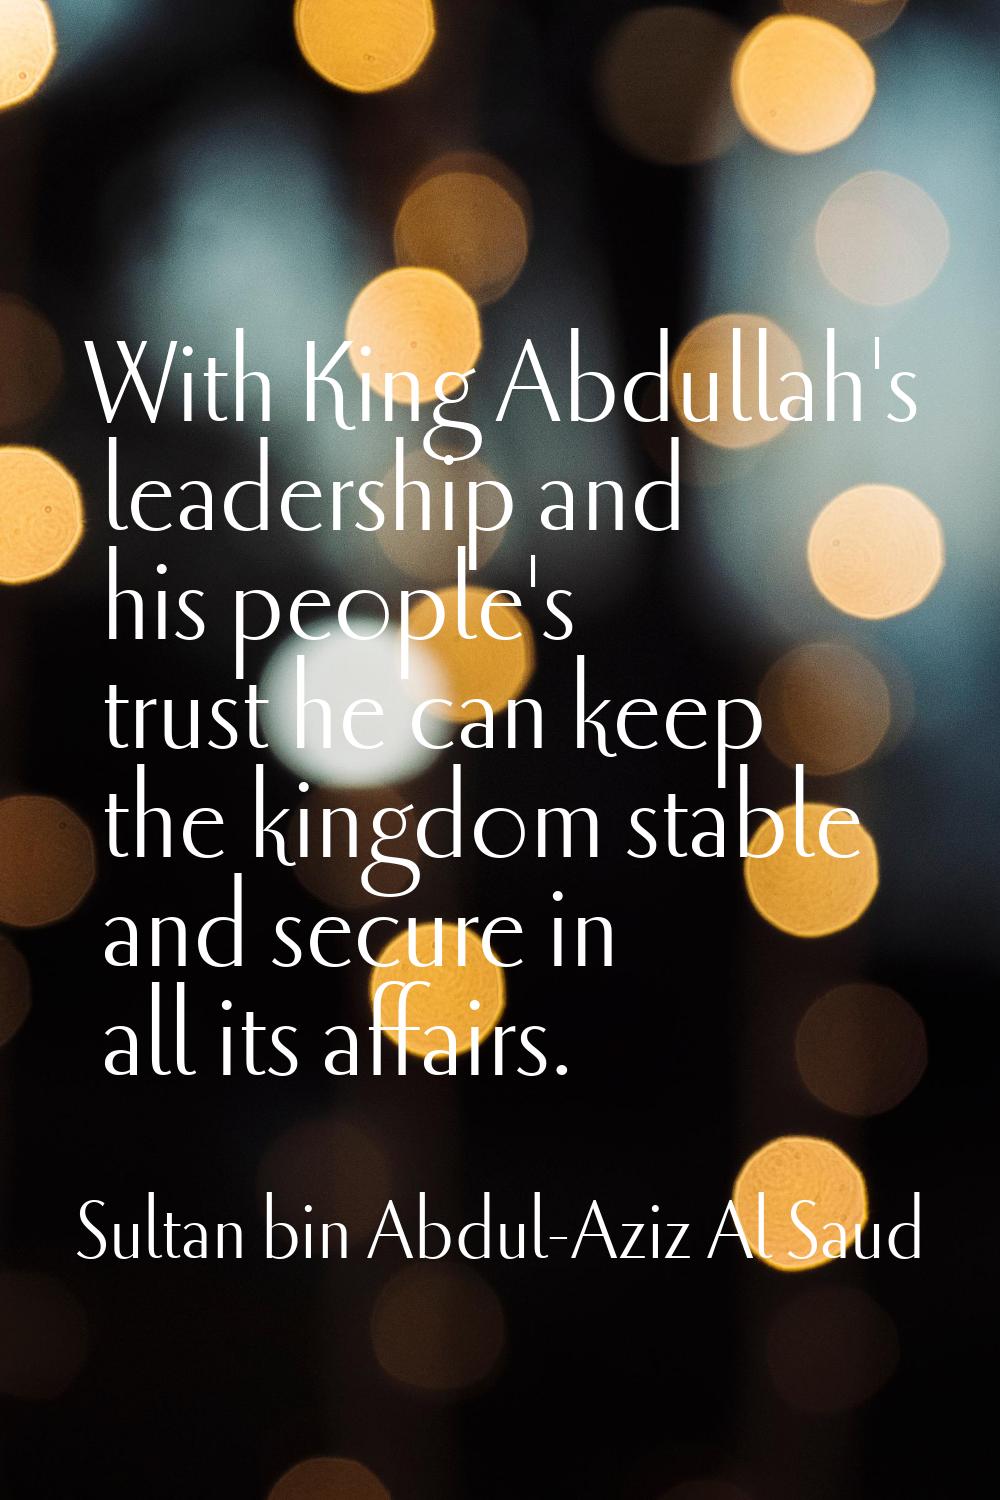 With King Abdullah's leadership and his people's trust he can keep the kingdom stable and secure in